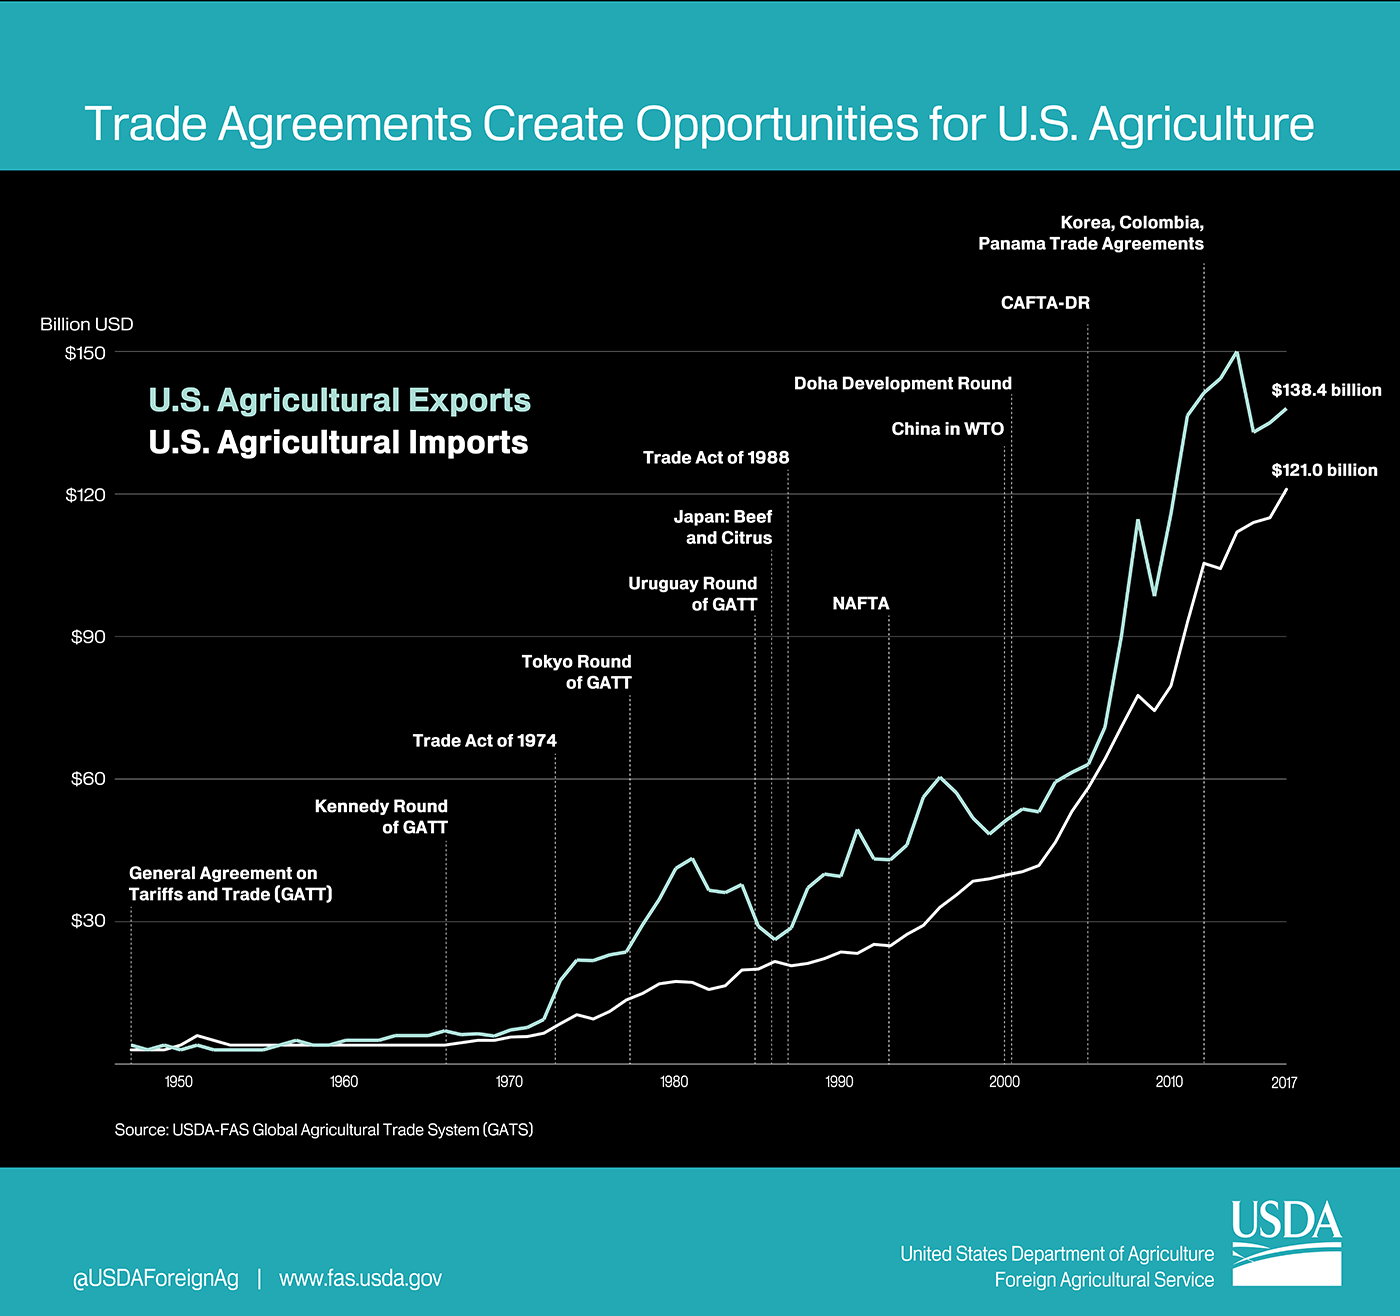 FAS - Trade Agreements Create Opportunities for U.S. Agriculture